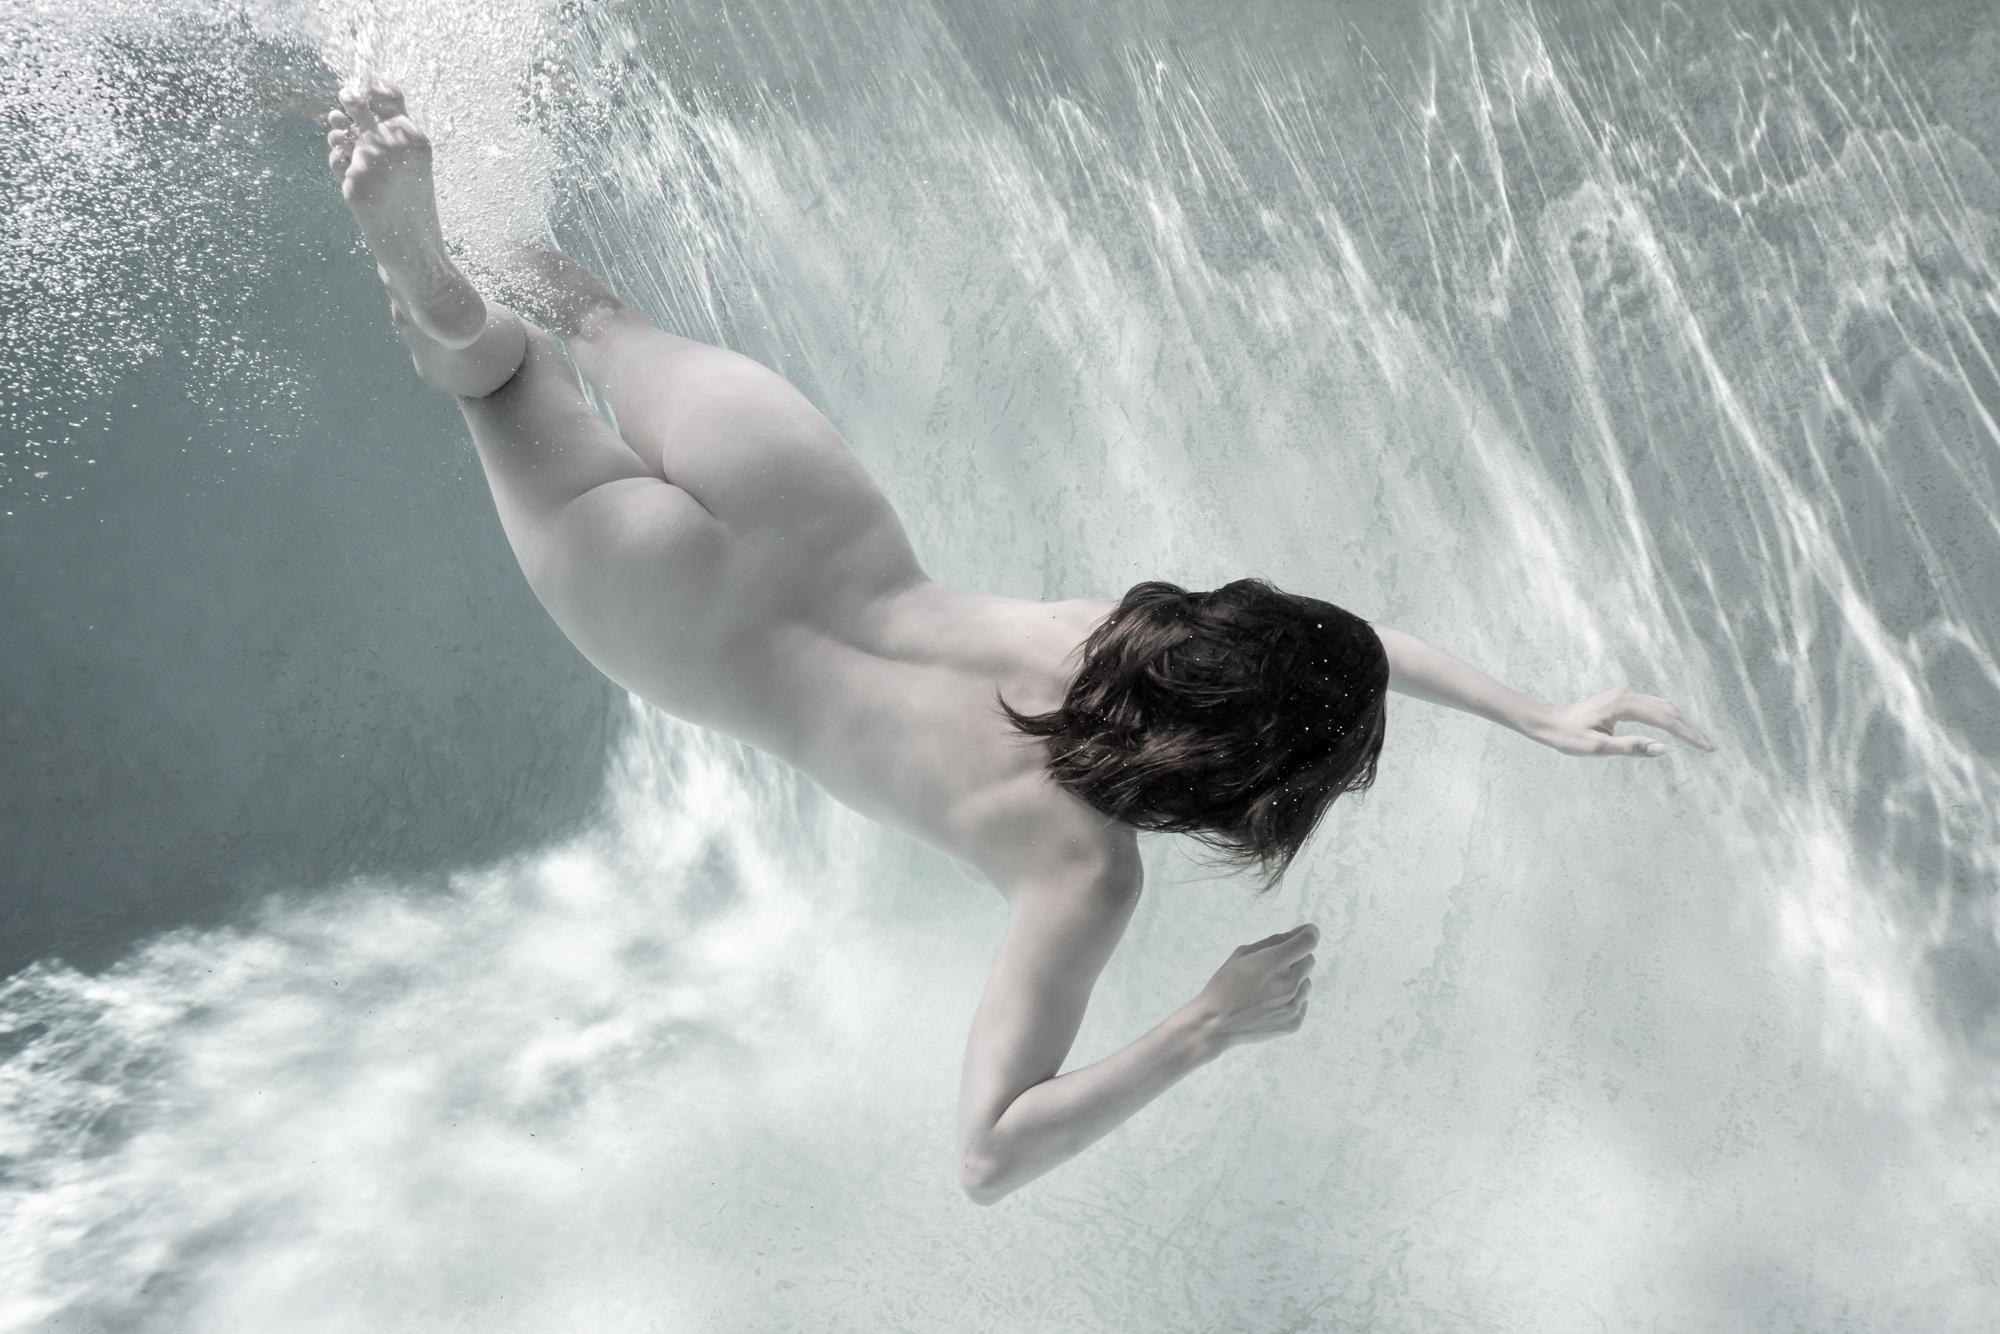 Alex Sher Figurative Photograph - Sweet and Spicy - underwater nude photograph - archival pigment print 18x24"